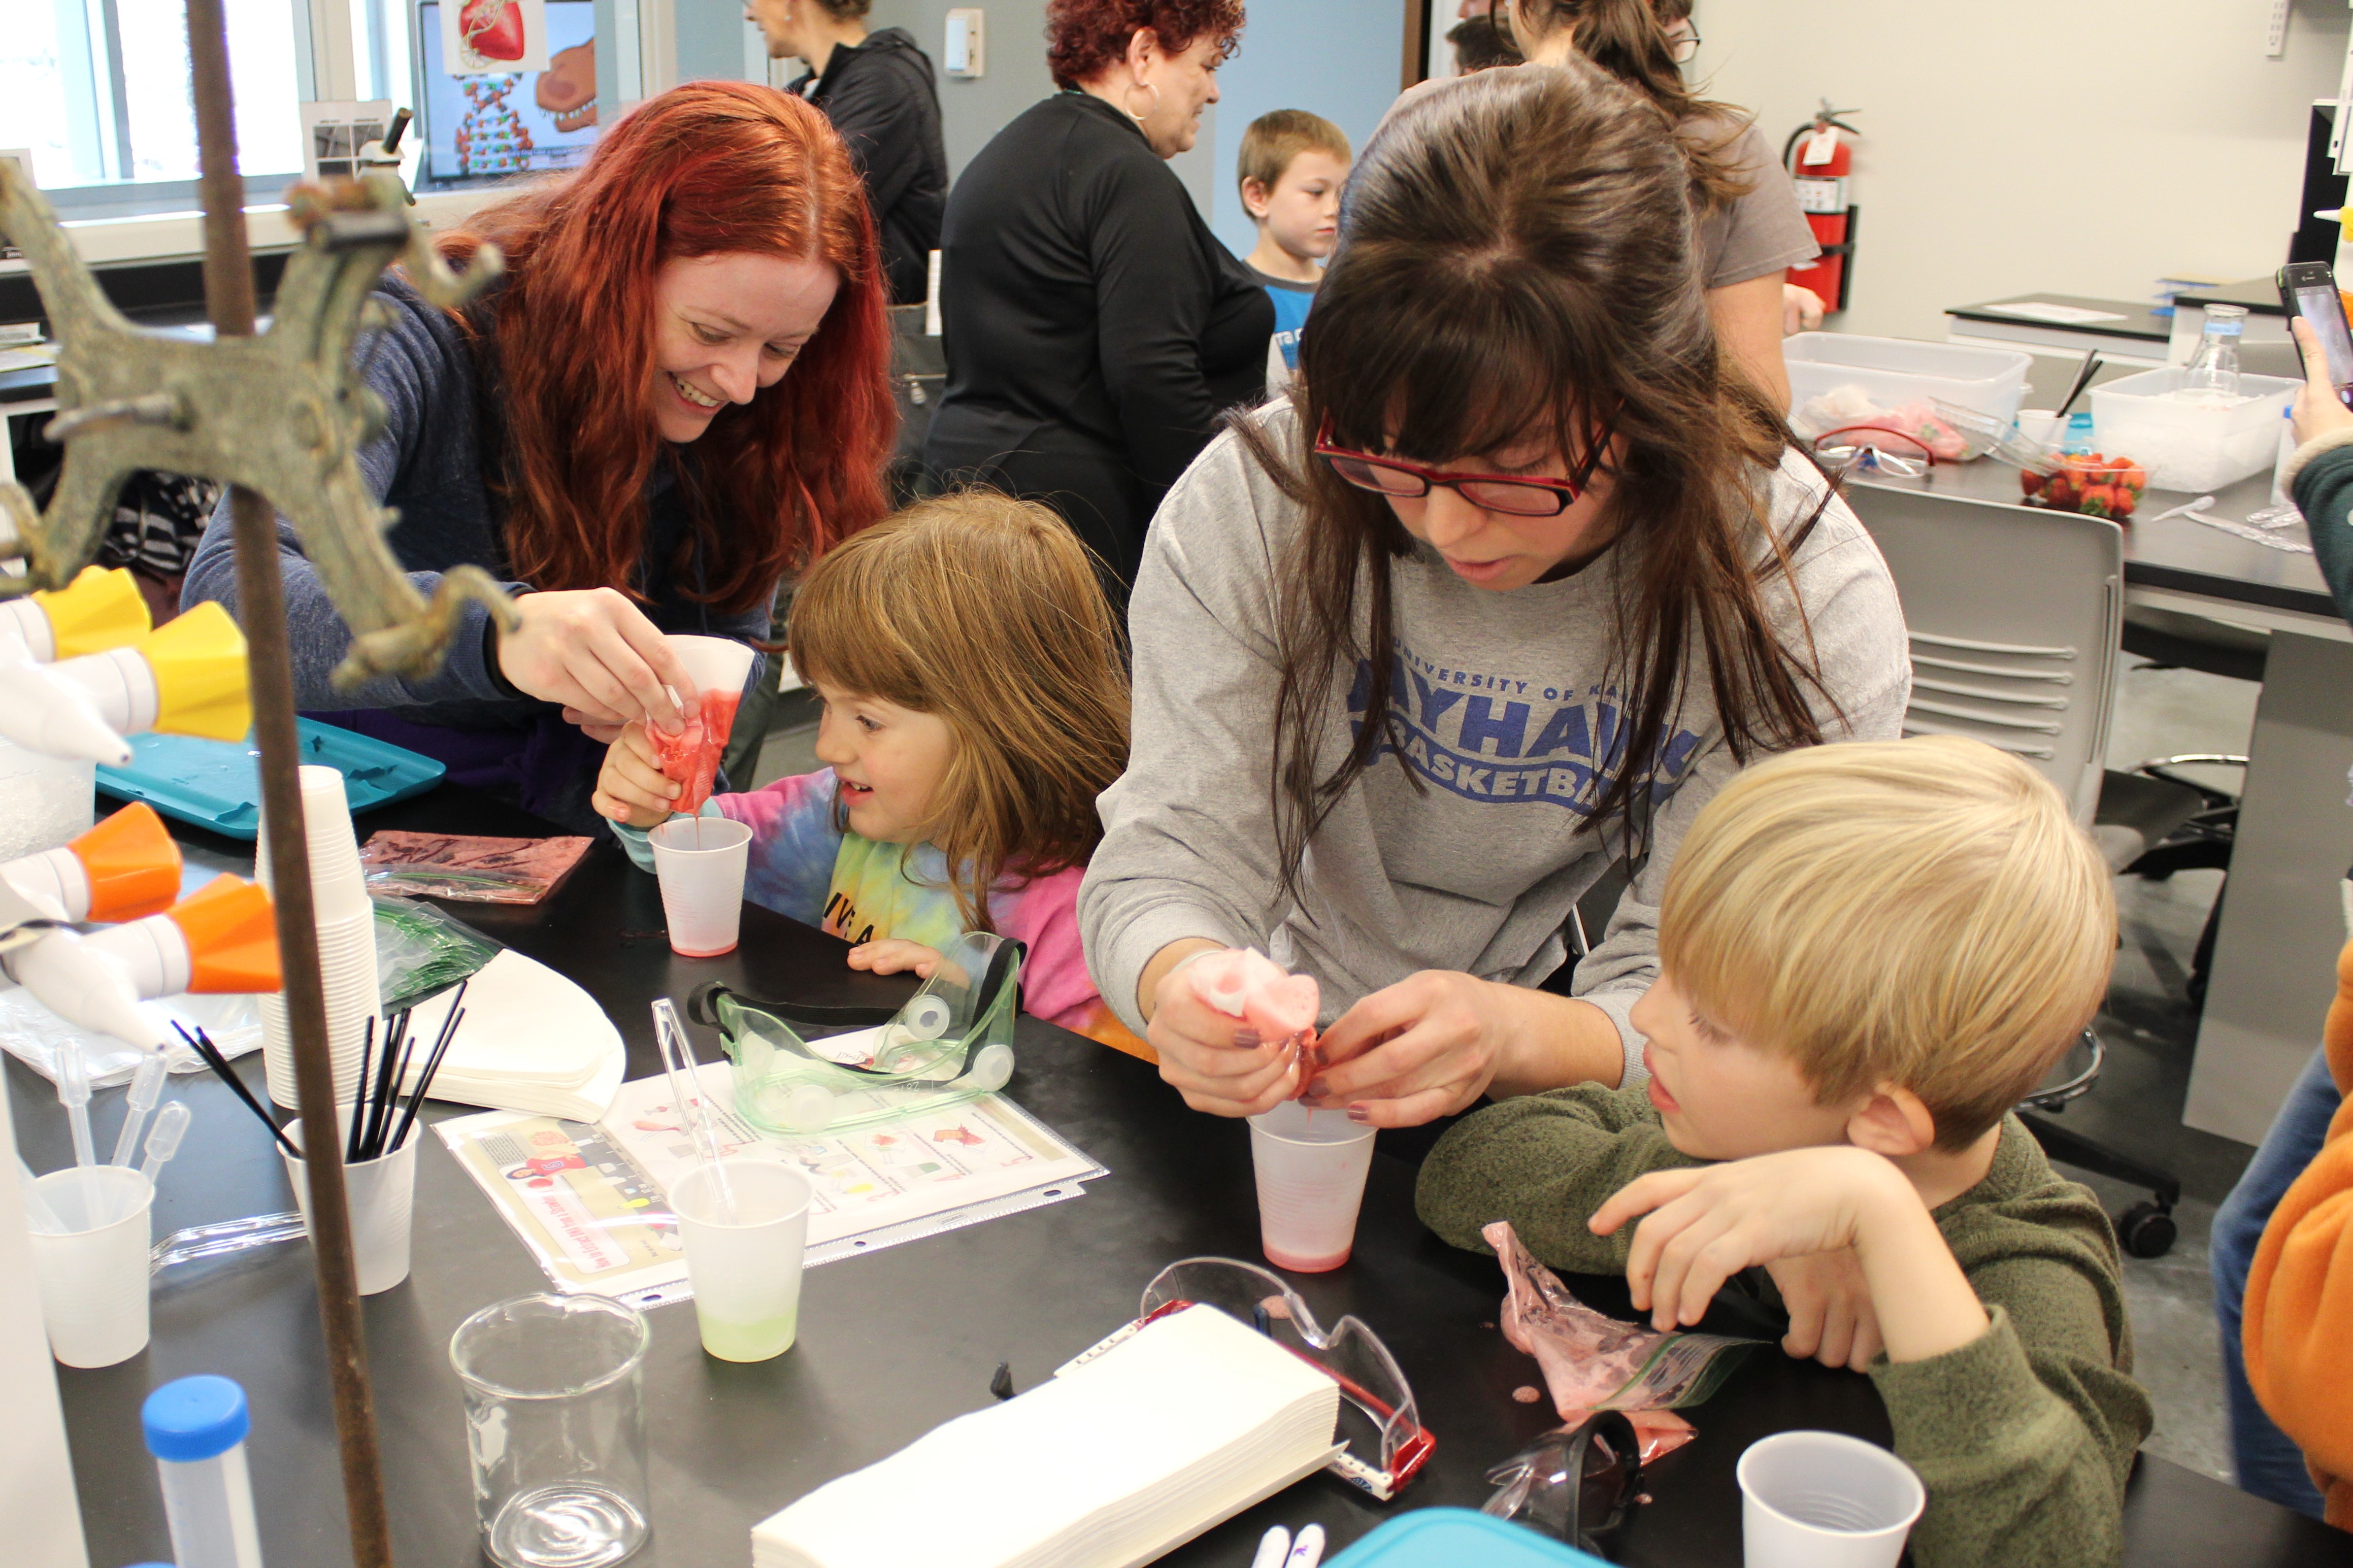 Two adults assisting two children with handling cups filled with red colored liquid.